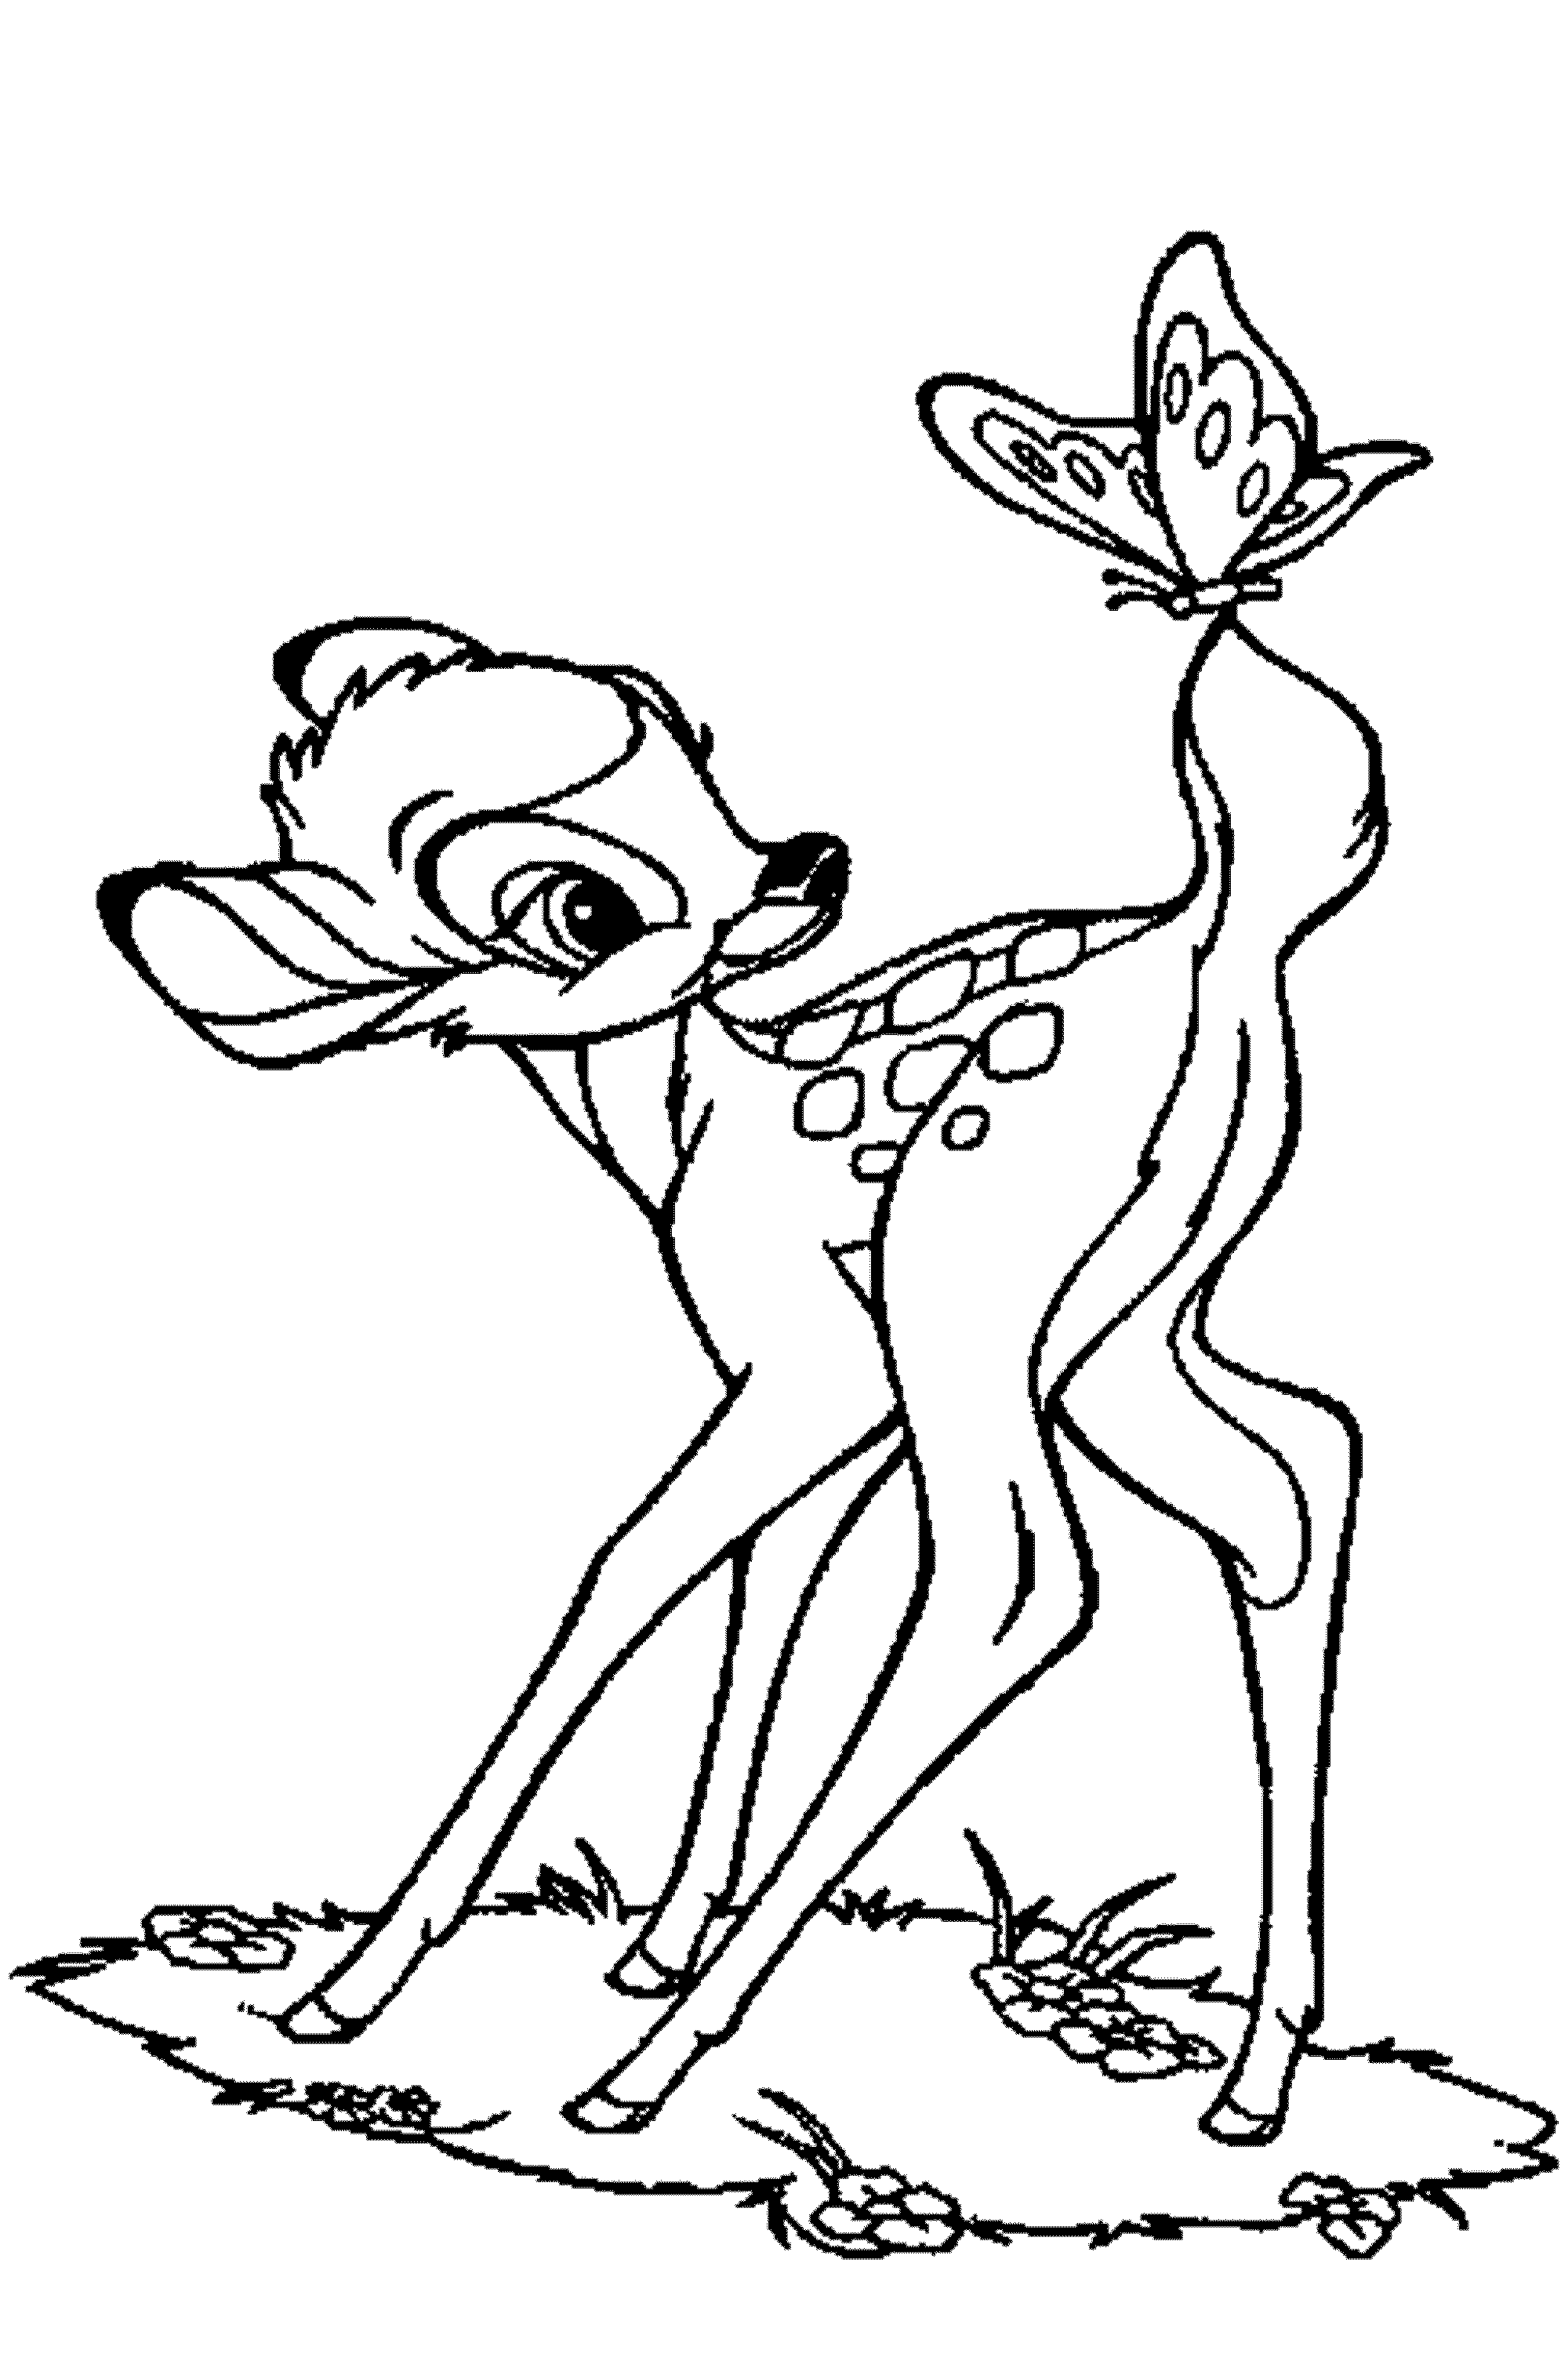 Coloring Pages Of Realistic Deer : Fresh Coloring Pages Deer Free (With